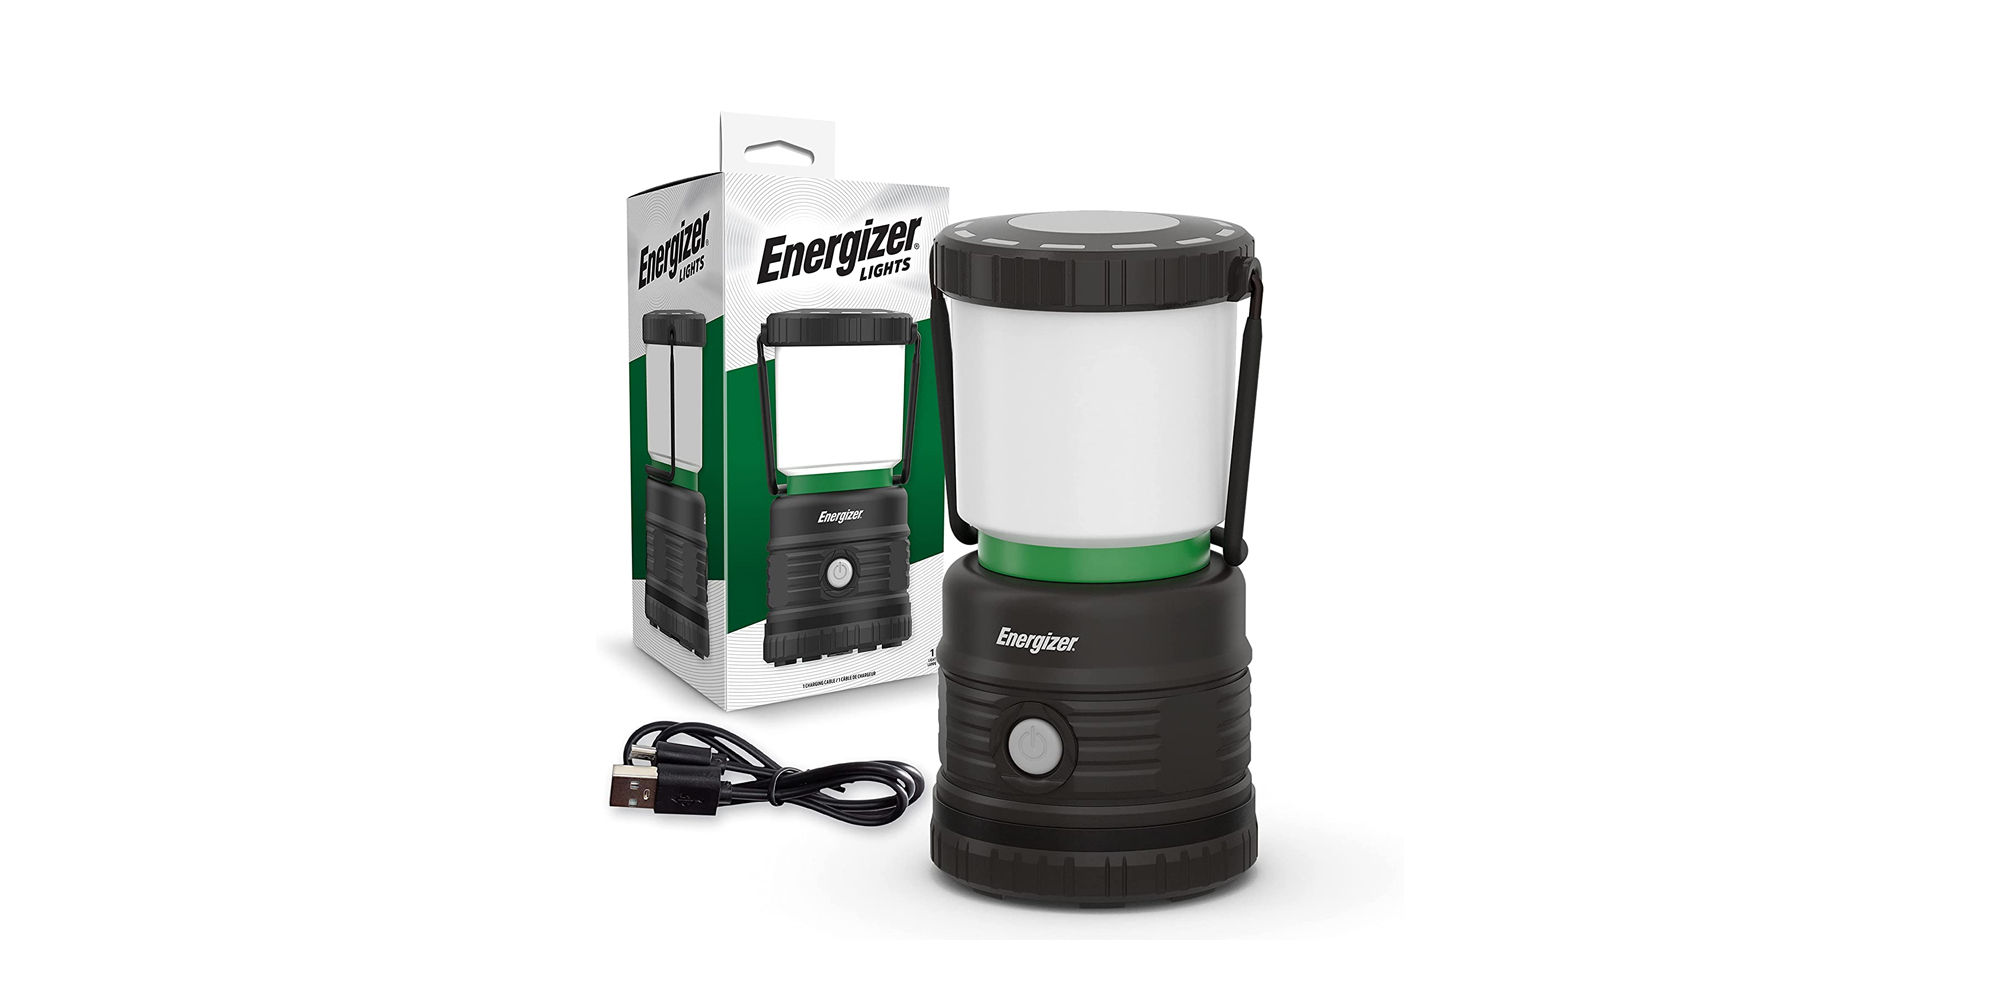 https://9to5toys.com/wp-content/uploads/sites/5/2022/04/Energizer-Rechargeable-LED-Lantern.jpg